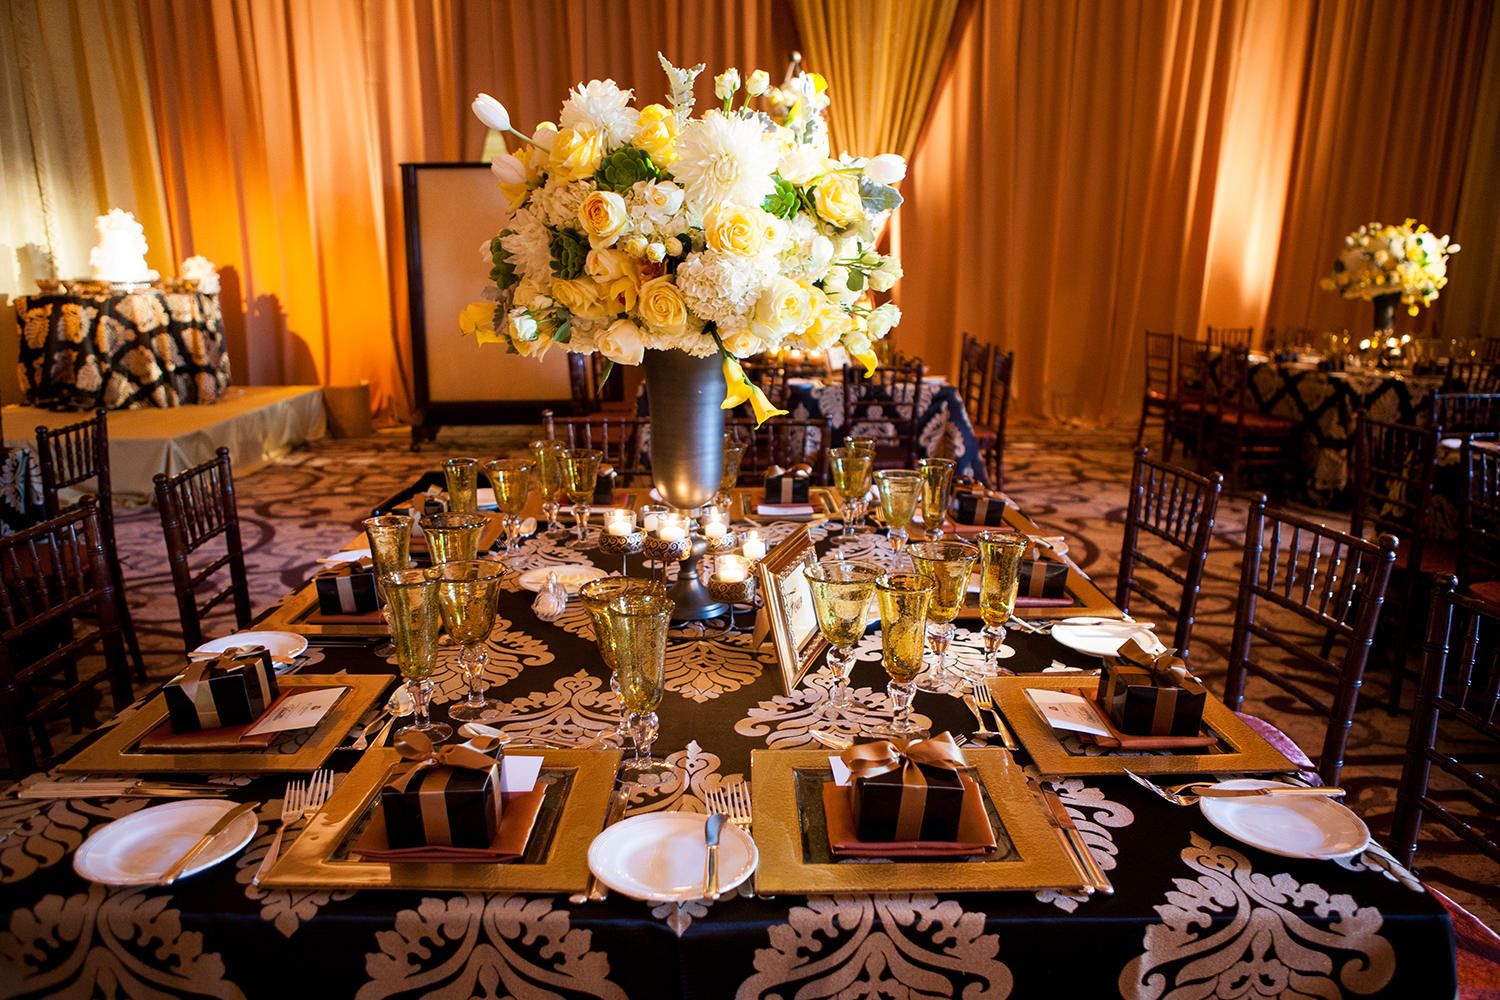 Ornate and richly colored table settings at a wedding reception